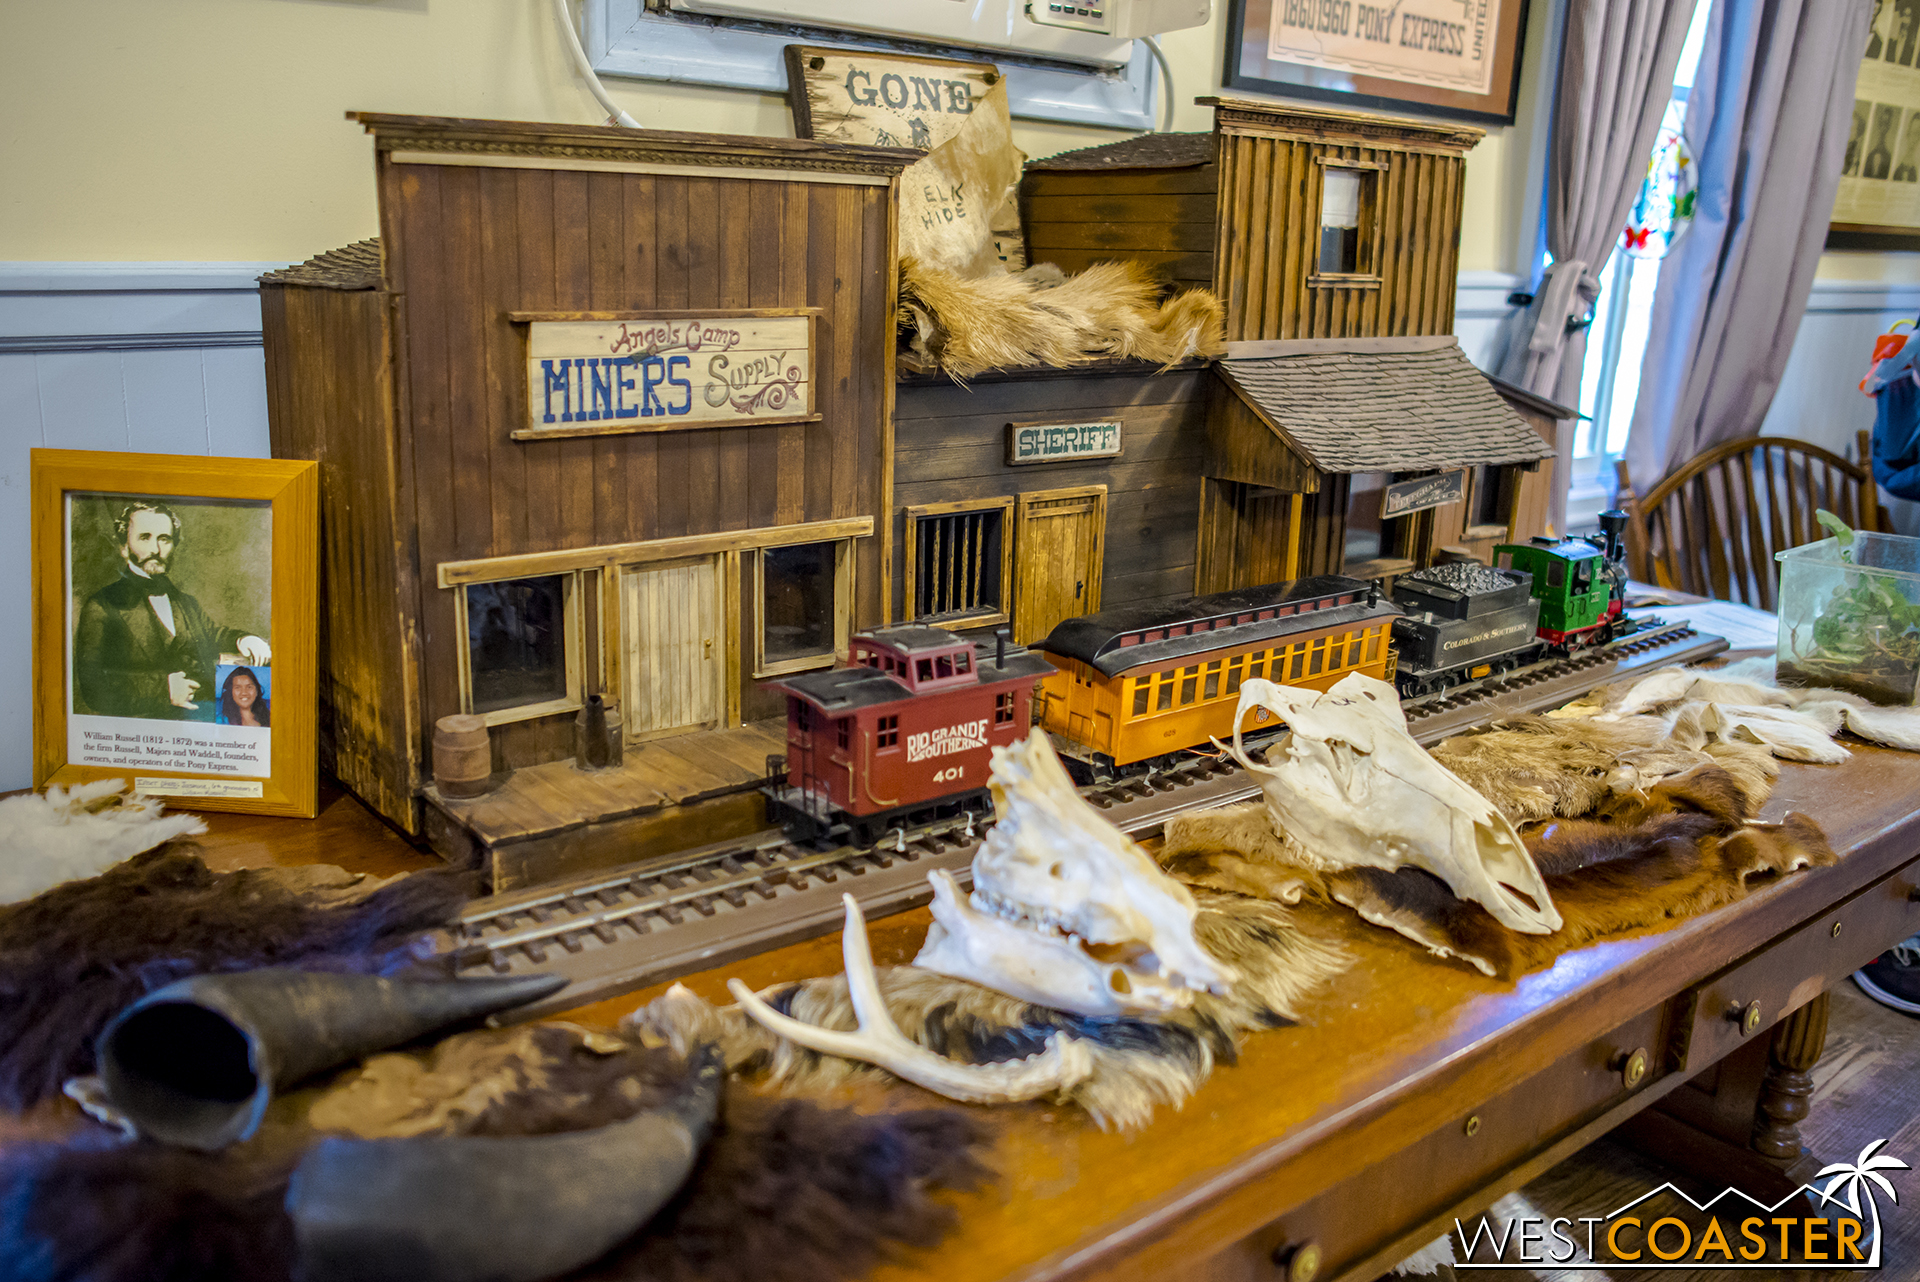  Fans of odd things can go to the Pony Express Outpost, next to the Wilderness Dance Hall, to check out a collection of educational things. 